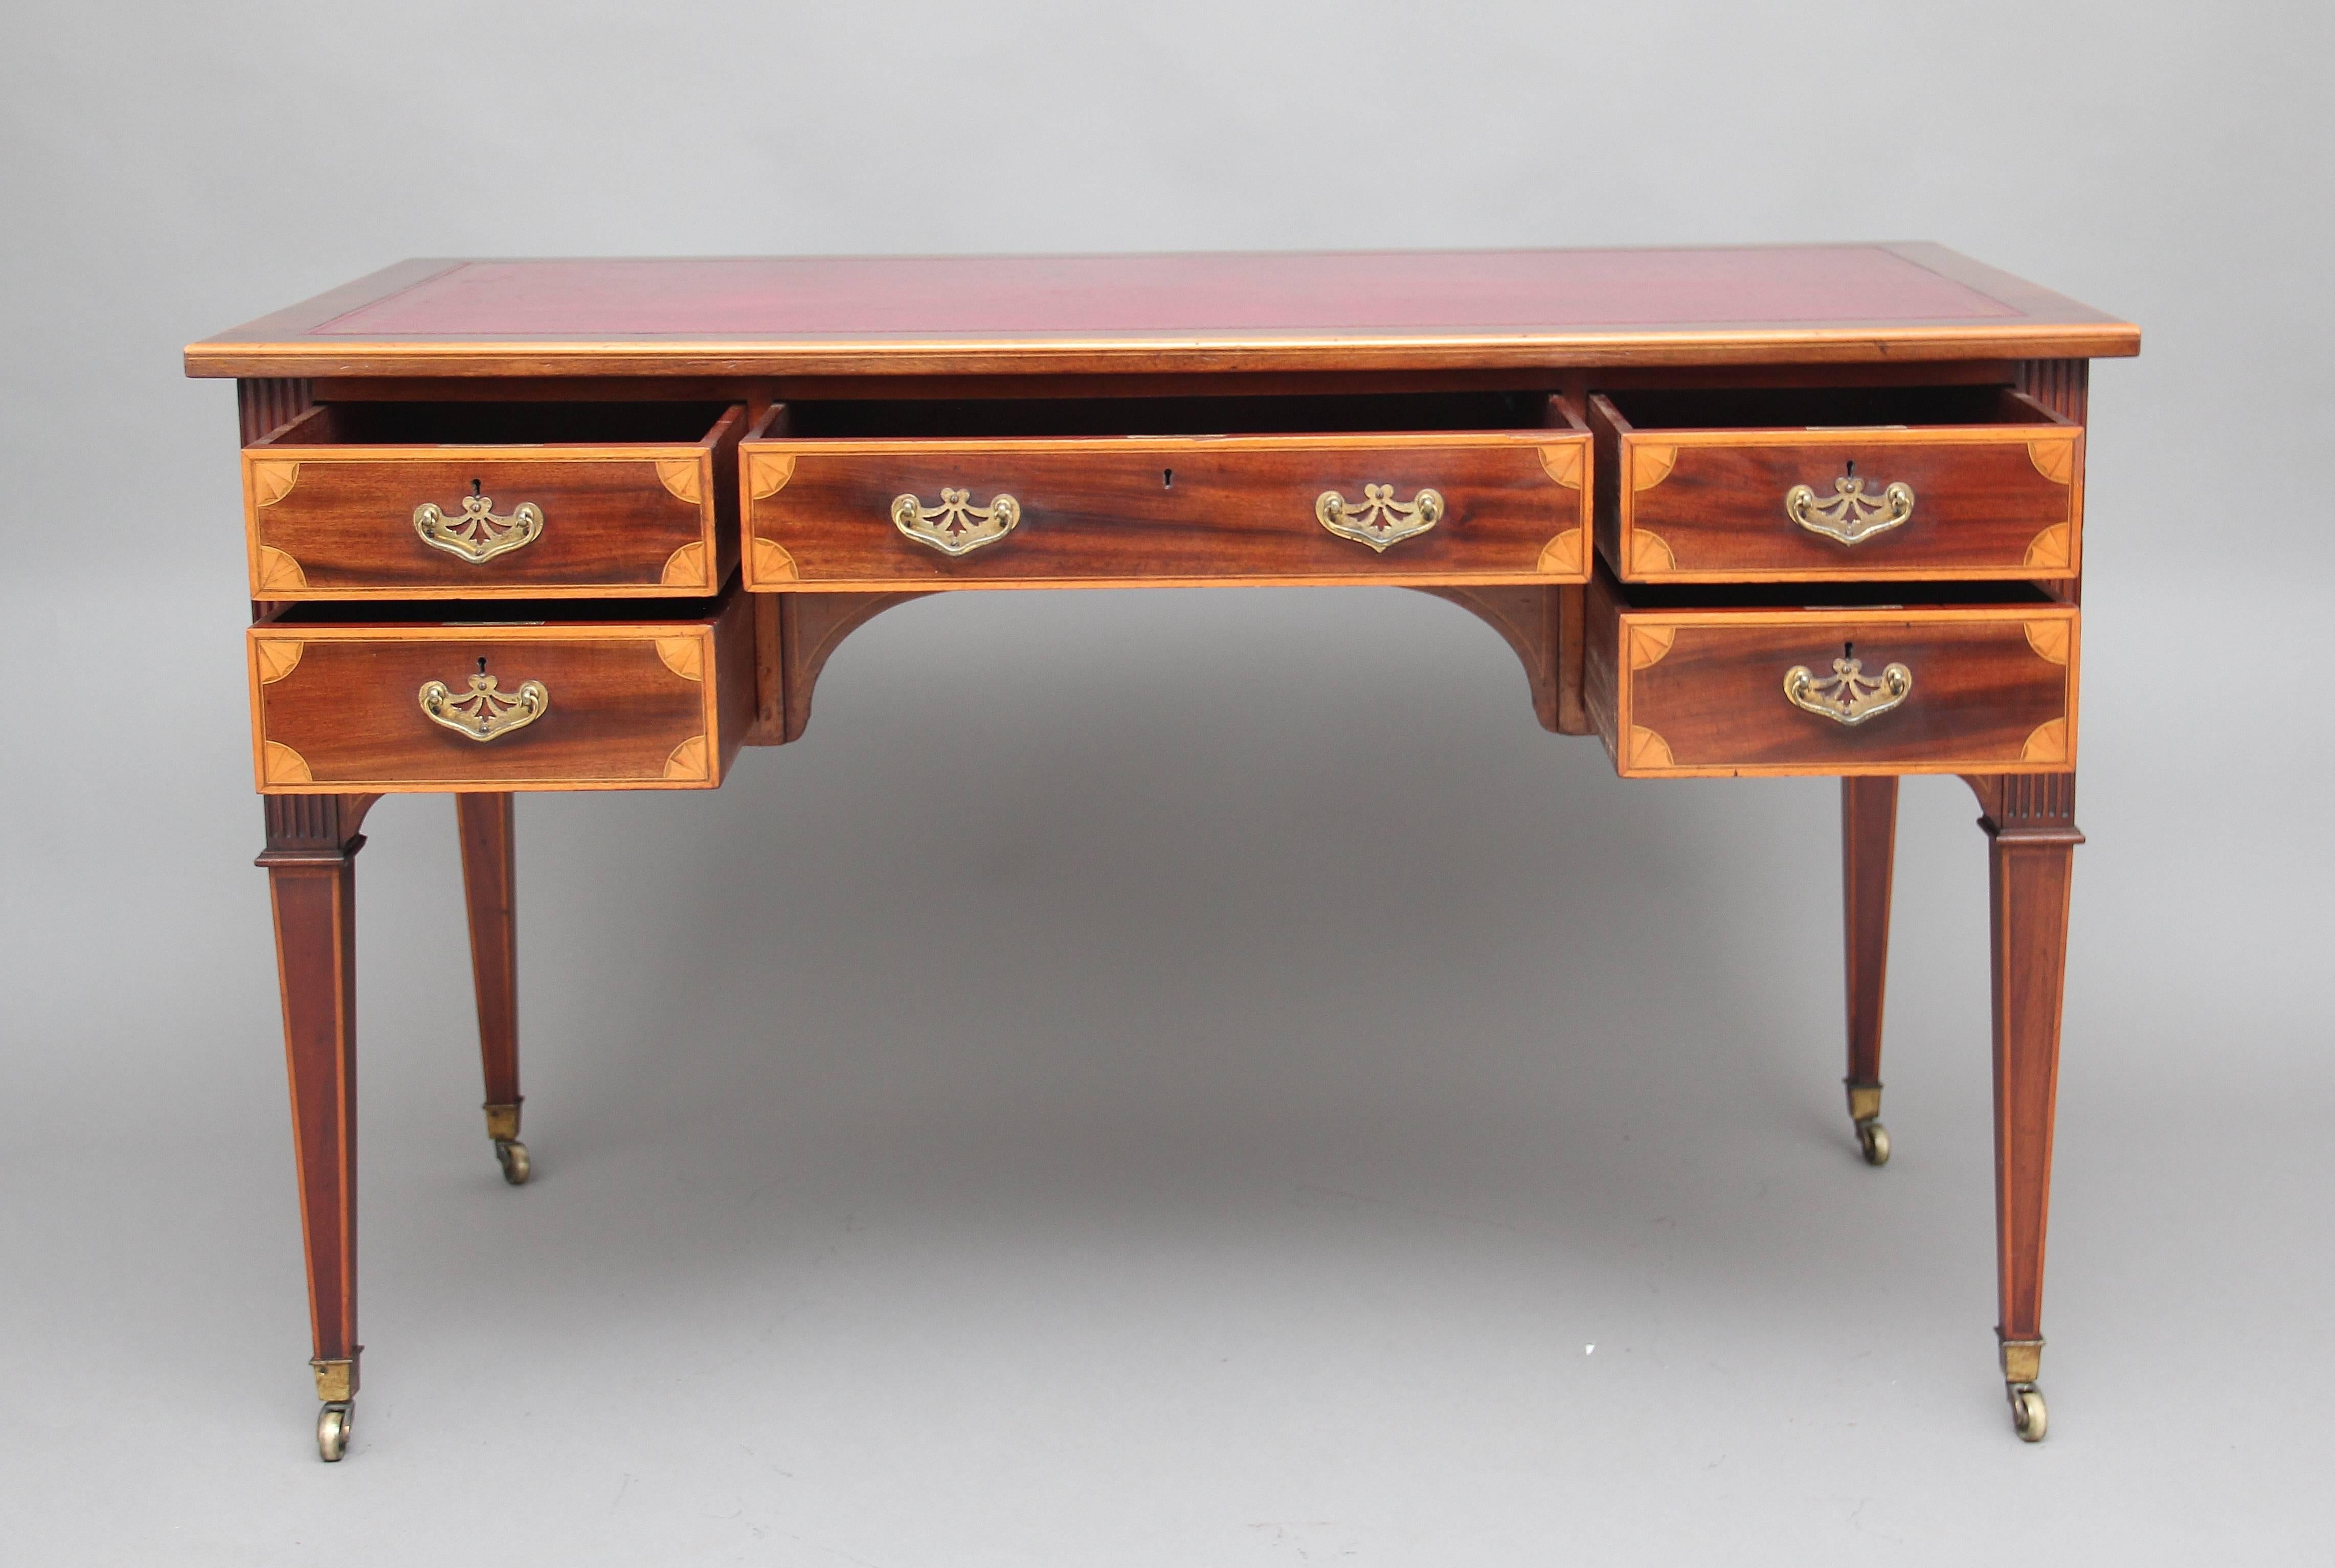 Early 20th century mahogany inlaid writing table, the top having a red leather writing surface decorated with gold tooling, with a combination of five mahogany lined drawers, original brass handles, the drawers fronts having boxwood inlay and inlaid